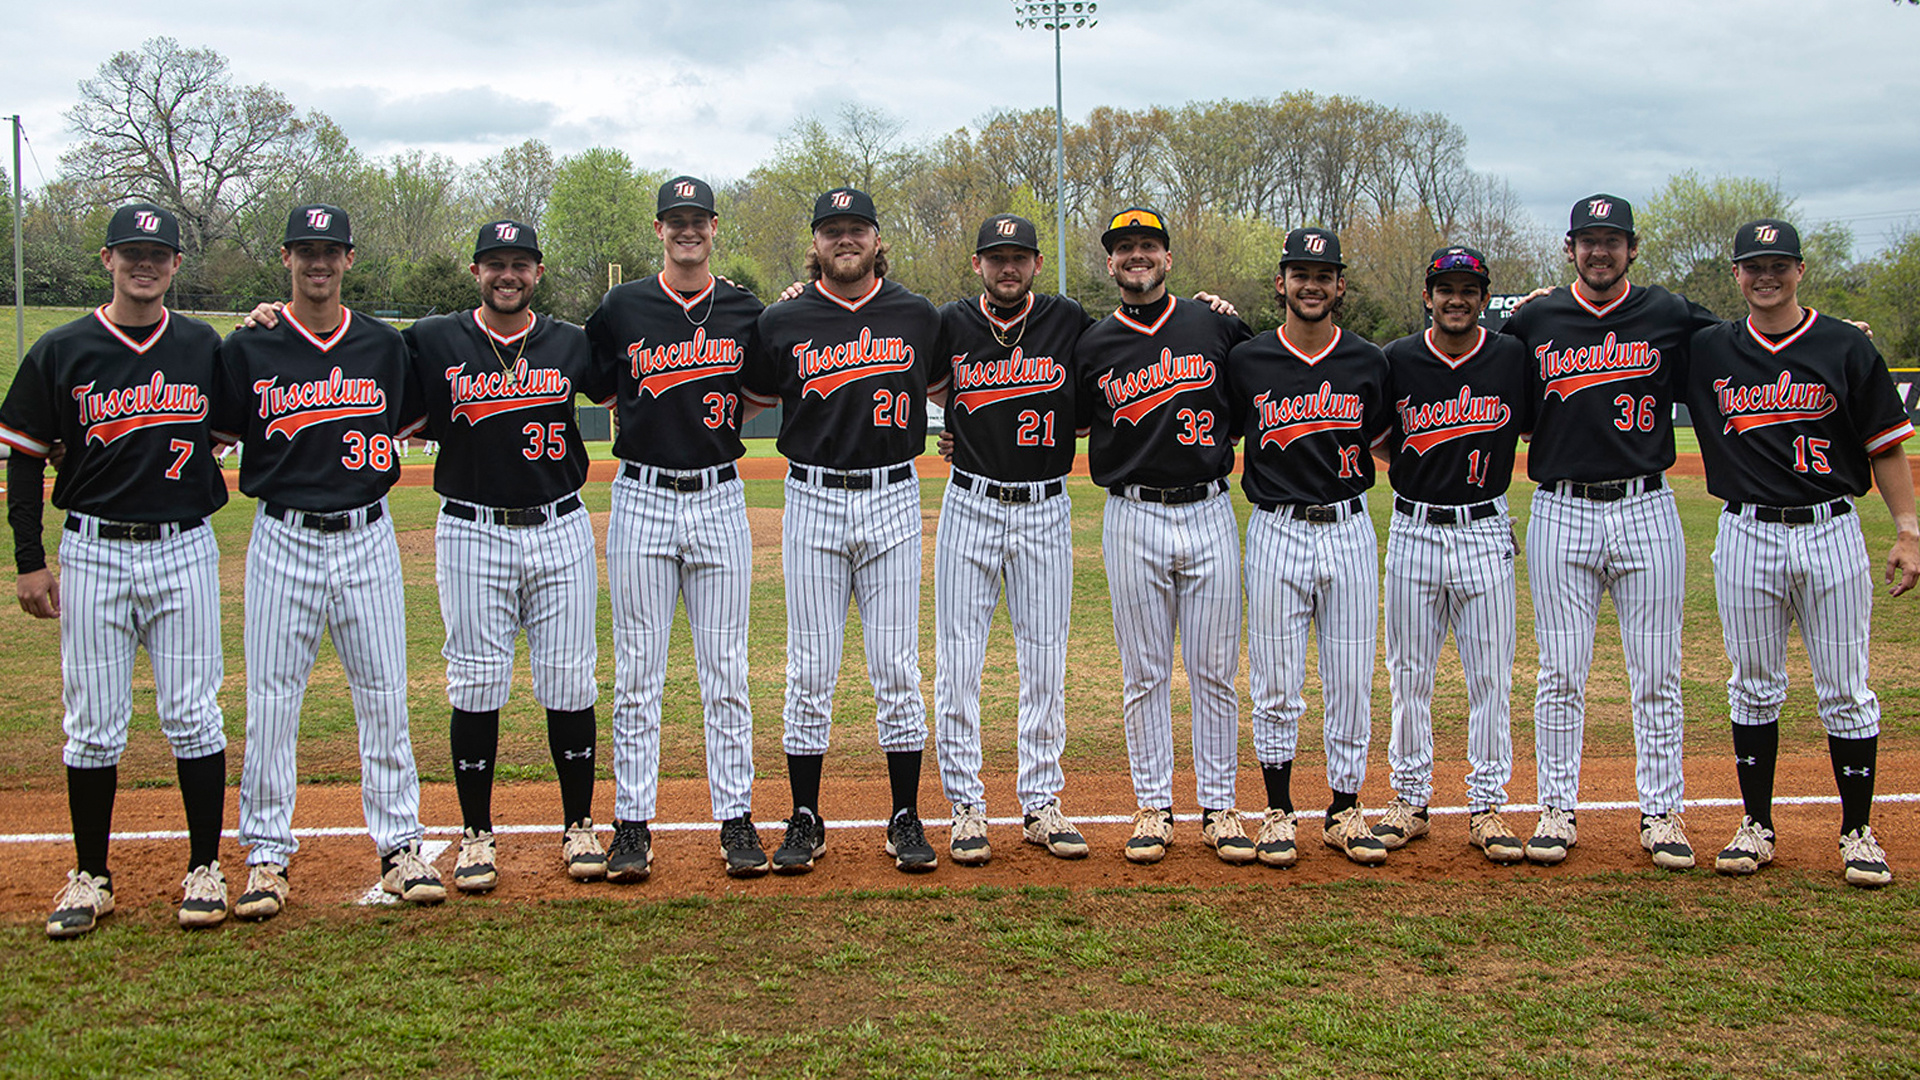 Pioneers blanked by No. 2 Wingate on Senior Day